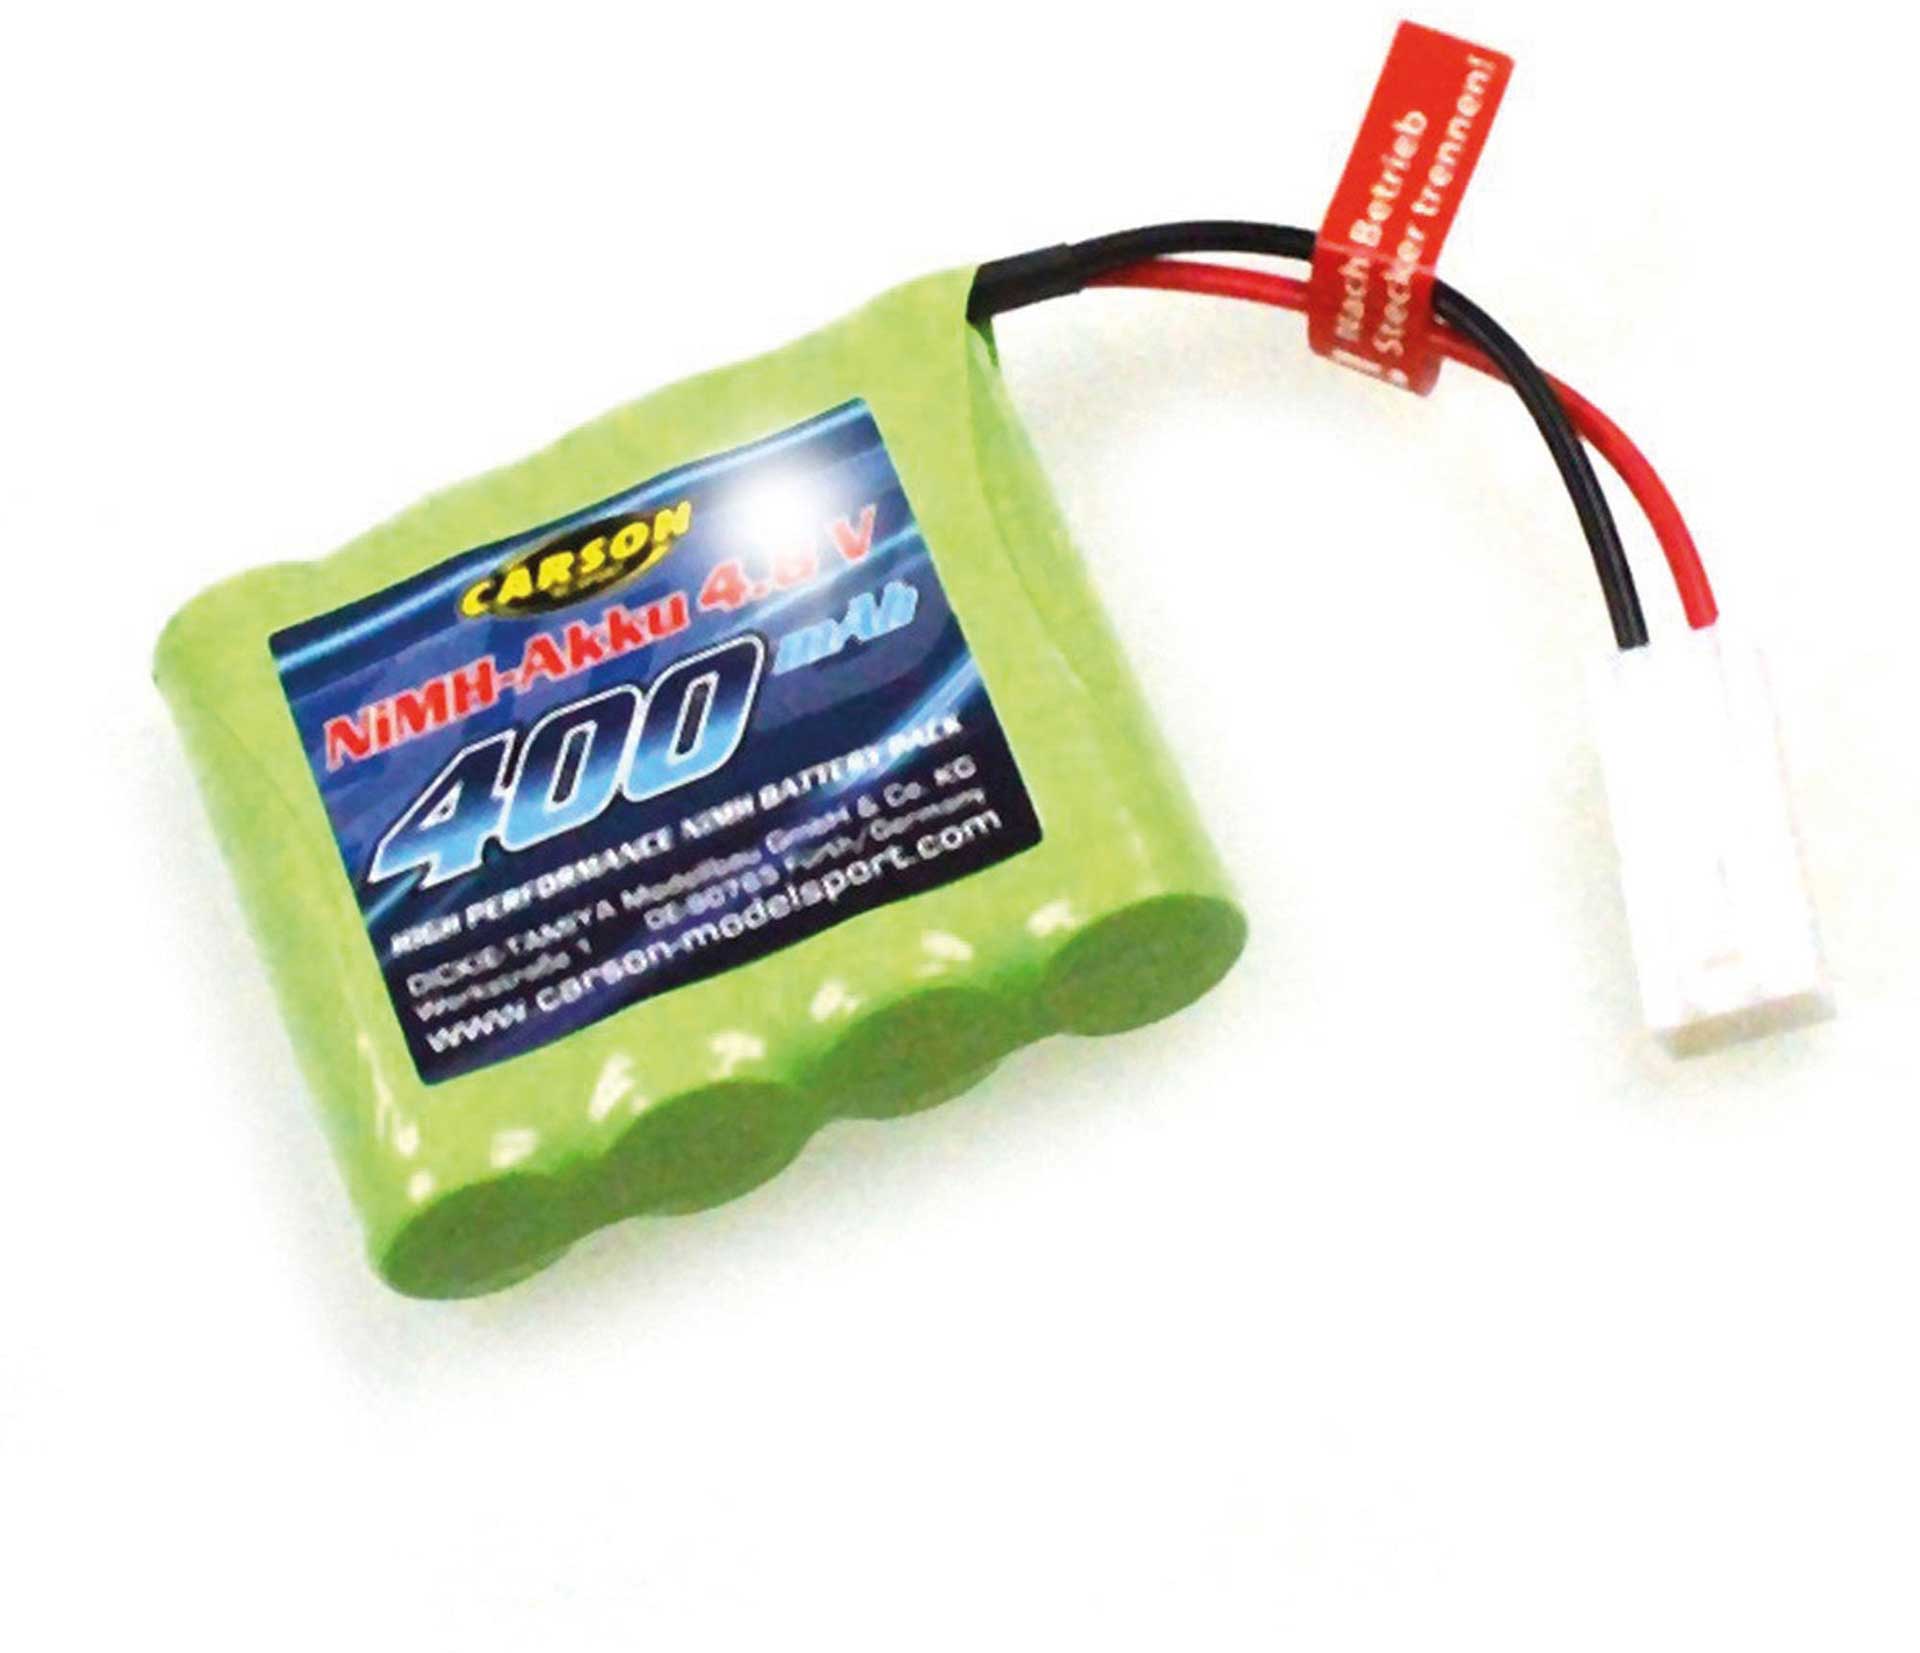 CARSON REPLACEMENT BATTERY PACK 4,8V 400MAH NI MH